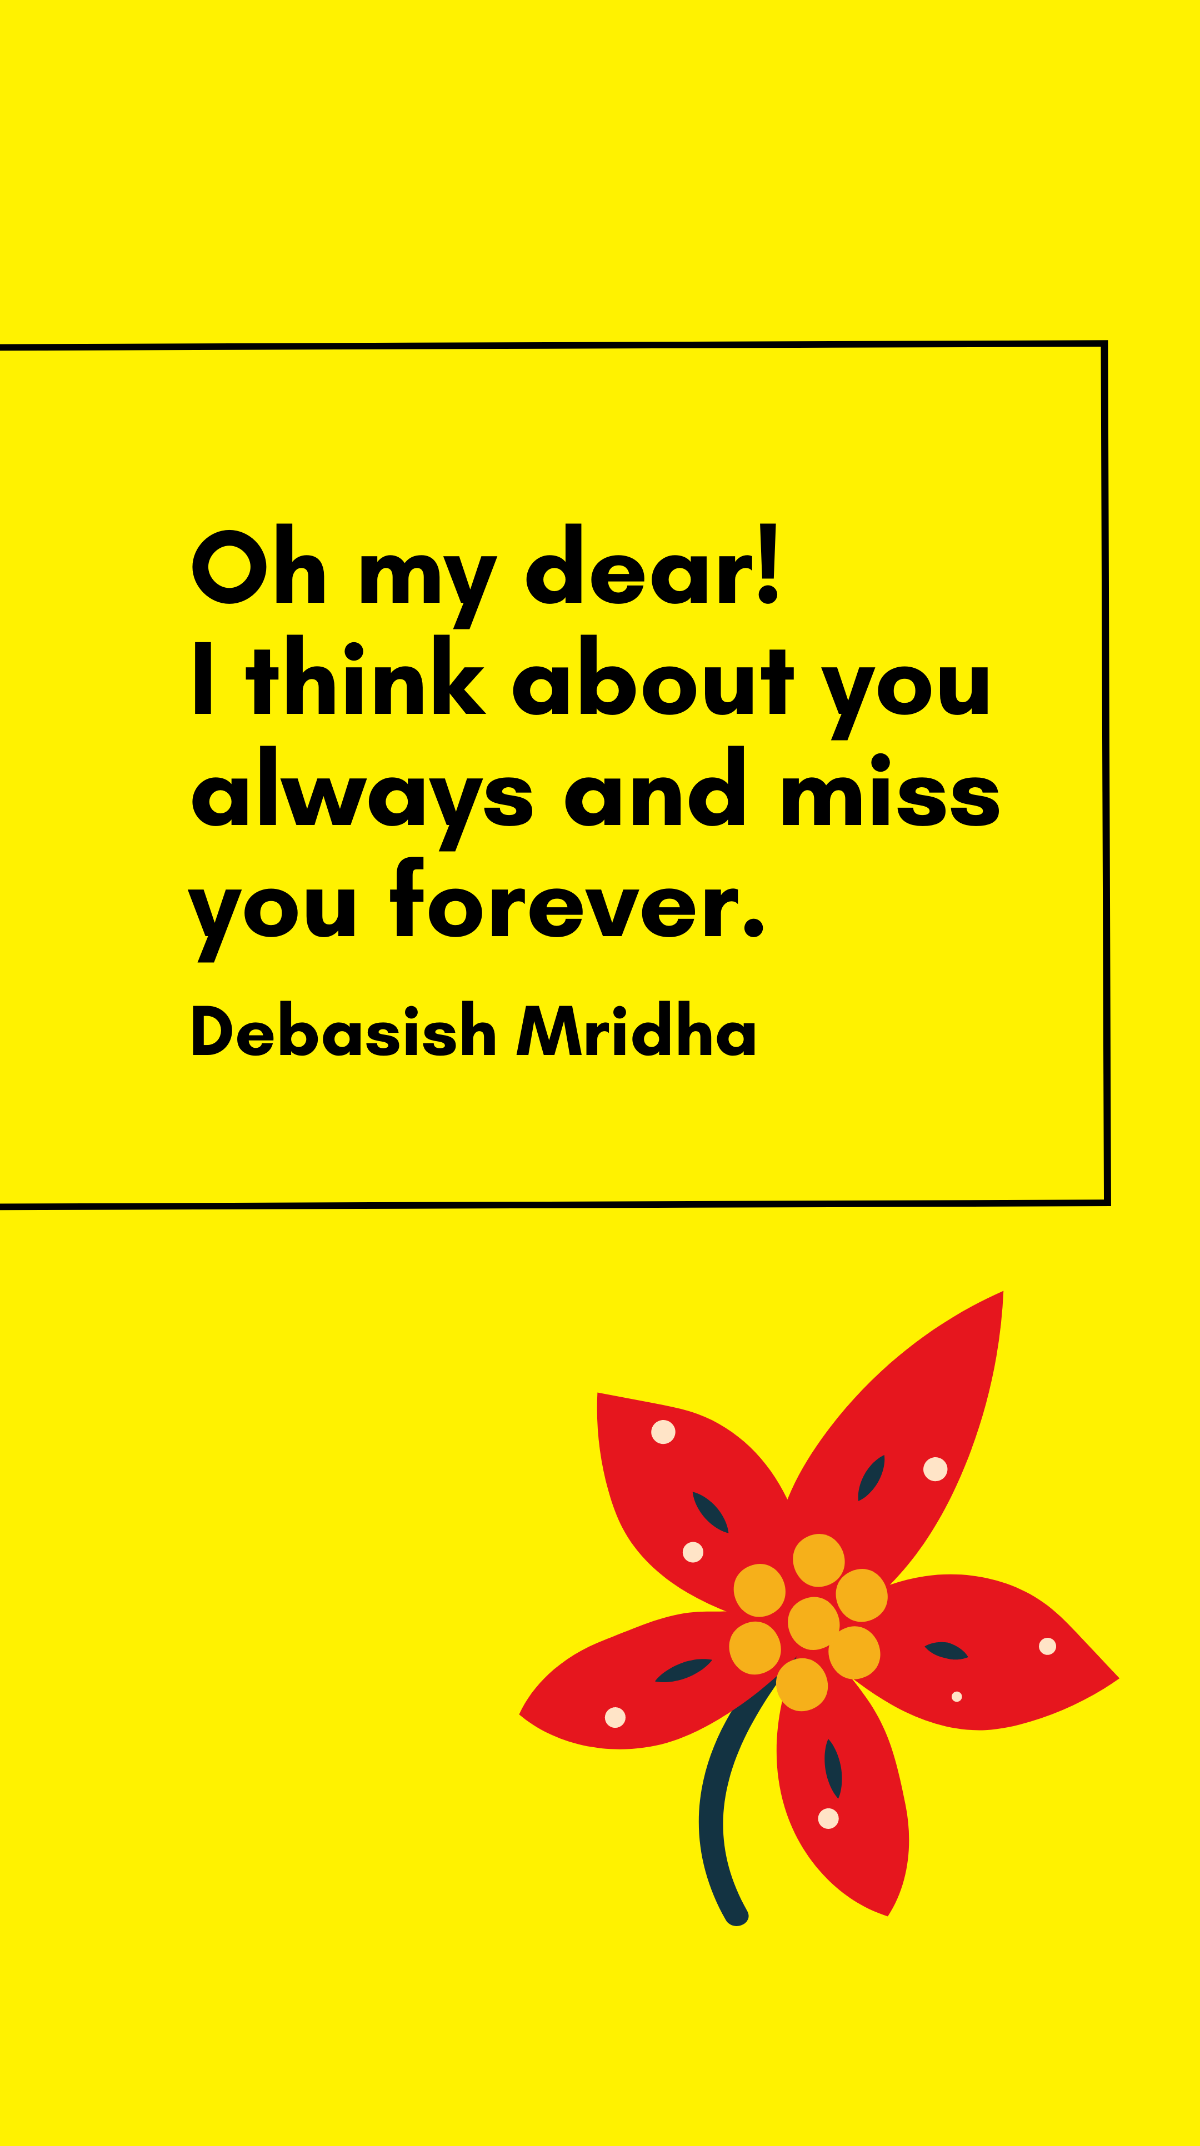 Free Debasish Mridha - Oh my dear! I think about you always and miss you forever. Template